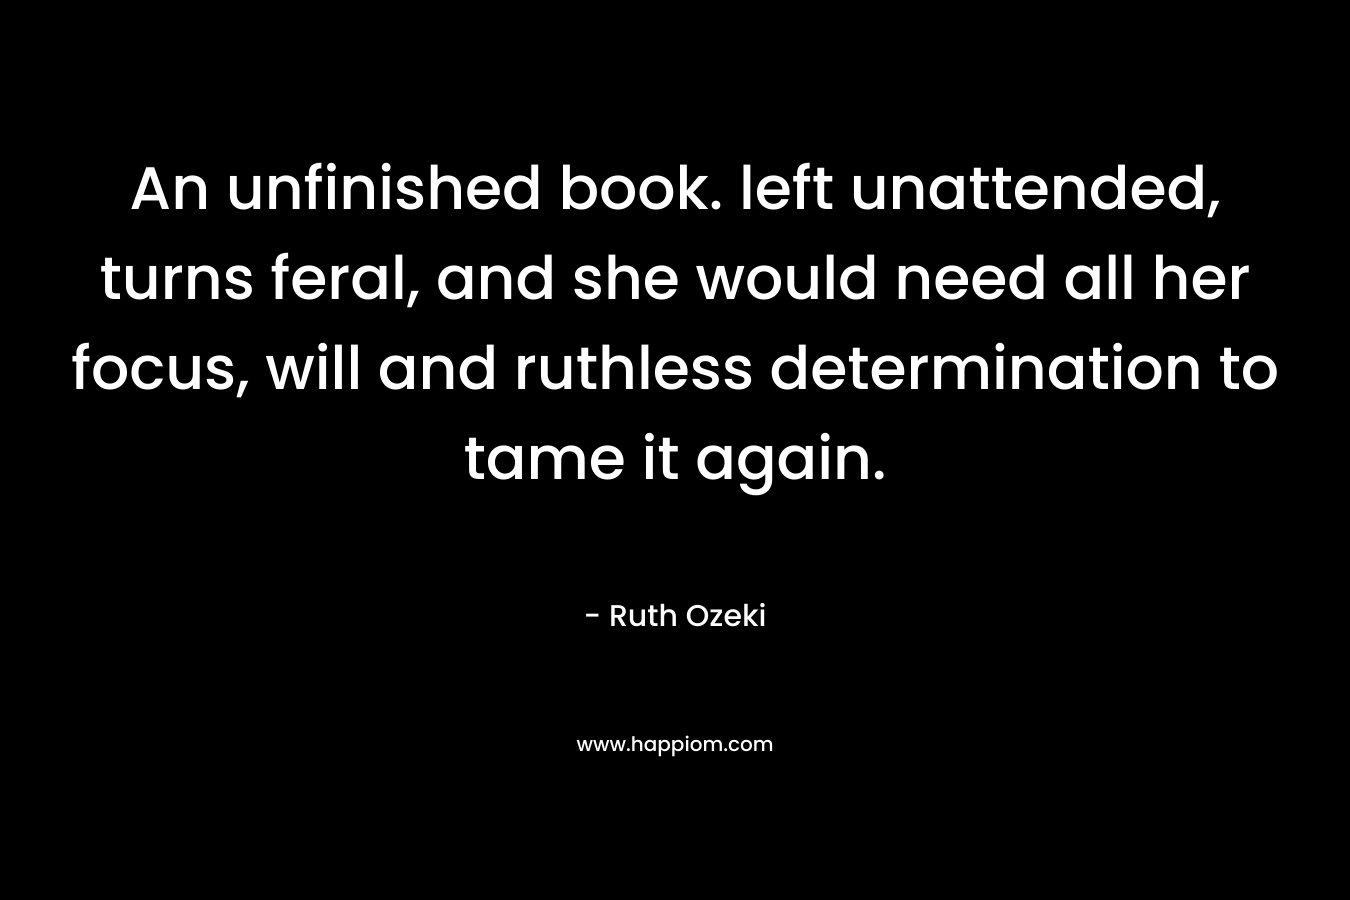 An unfinished book. left unattended, turns feral, and she would need all her focus, will and ruthless determination to tame it again. – Ruth Ozeki